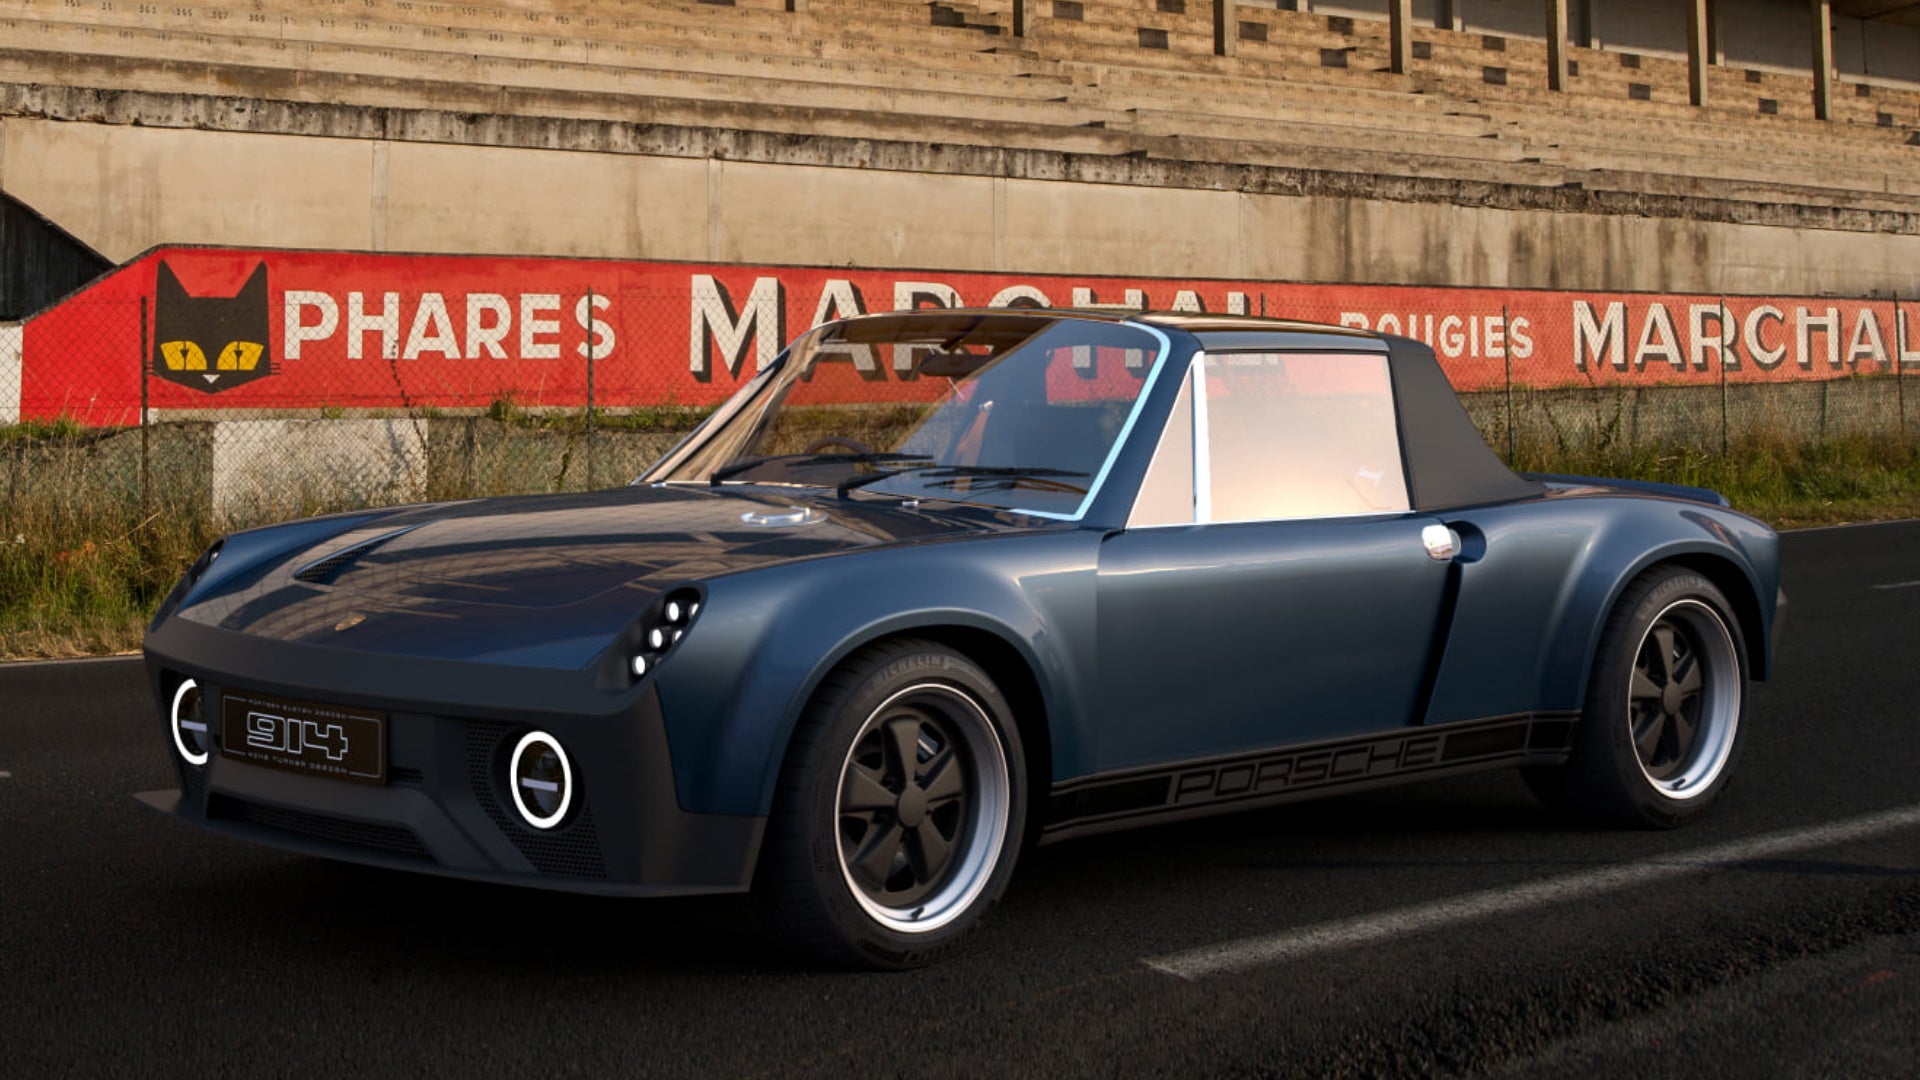 The Porsche 914 Finally Gets Its Due With an Aggressive